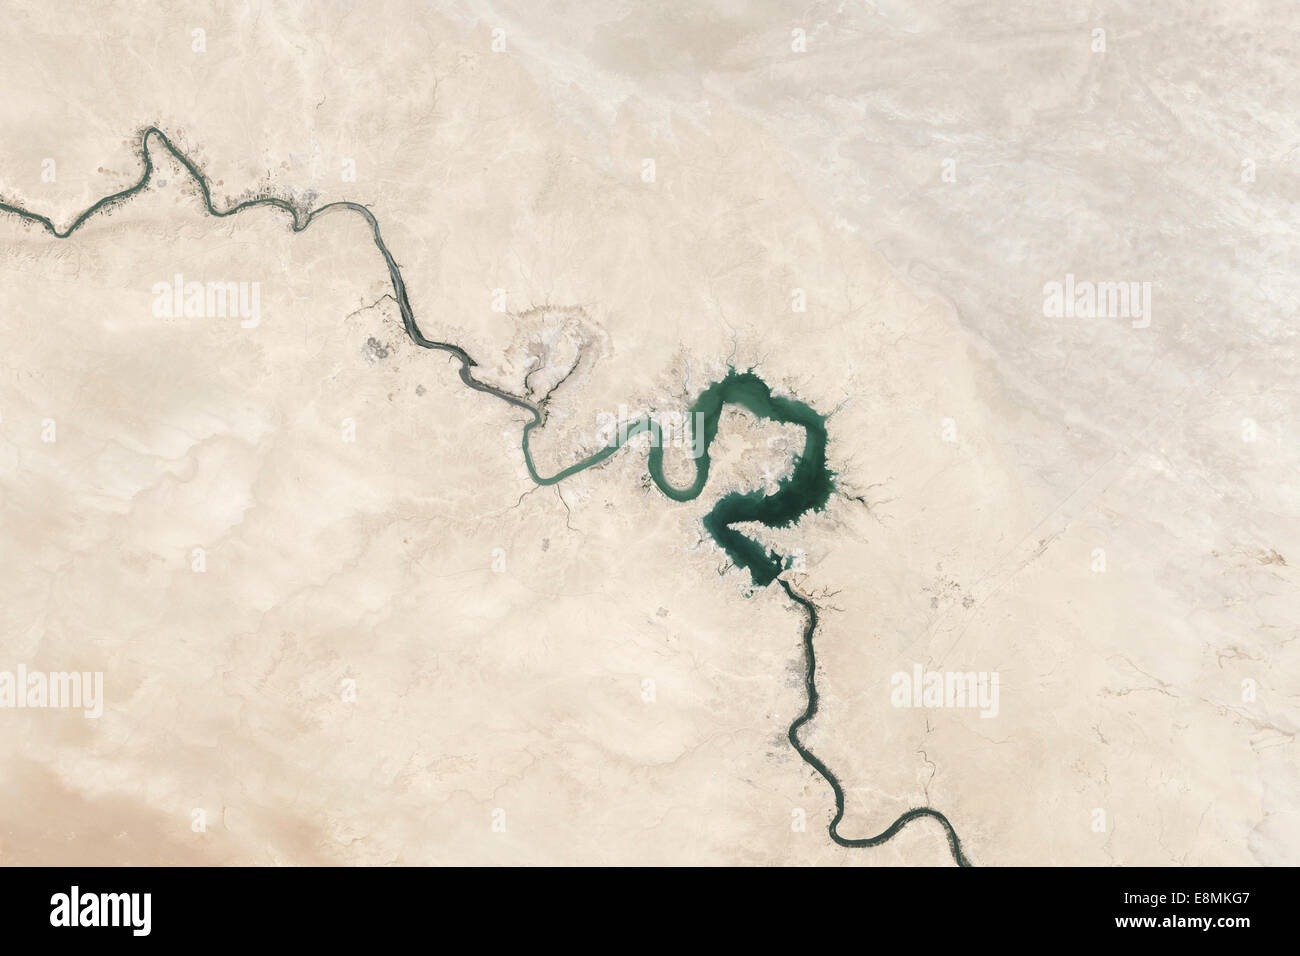 September 15, 2009 - Natural color image of Qadisiyah Reservoir in Iraq. Stock Photo